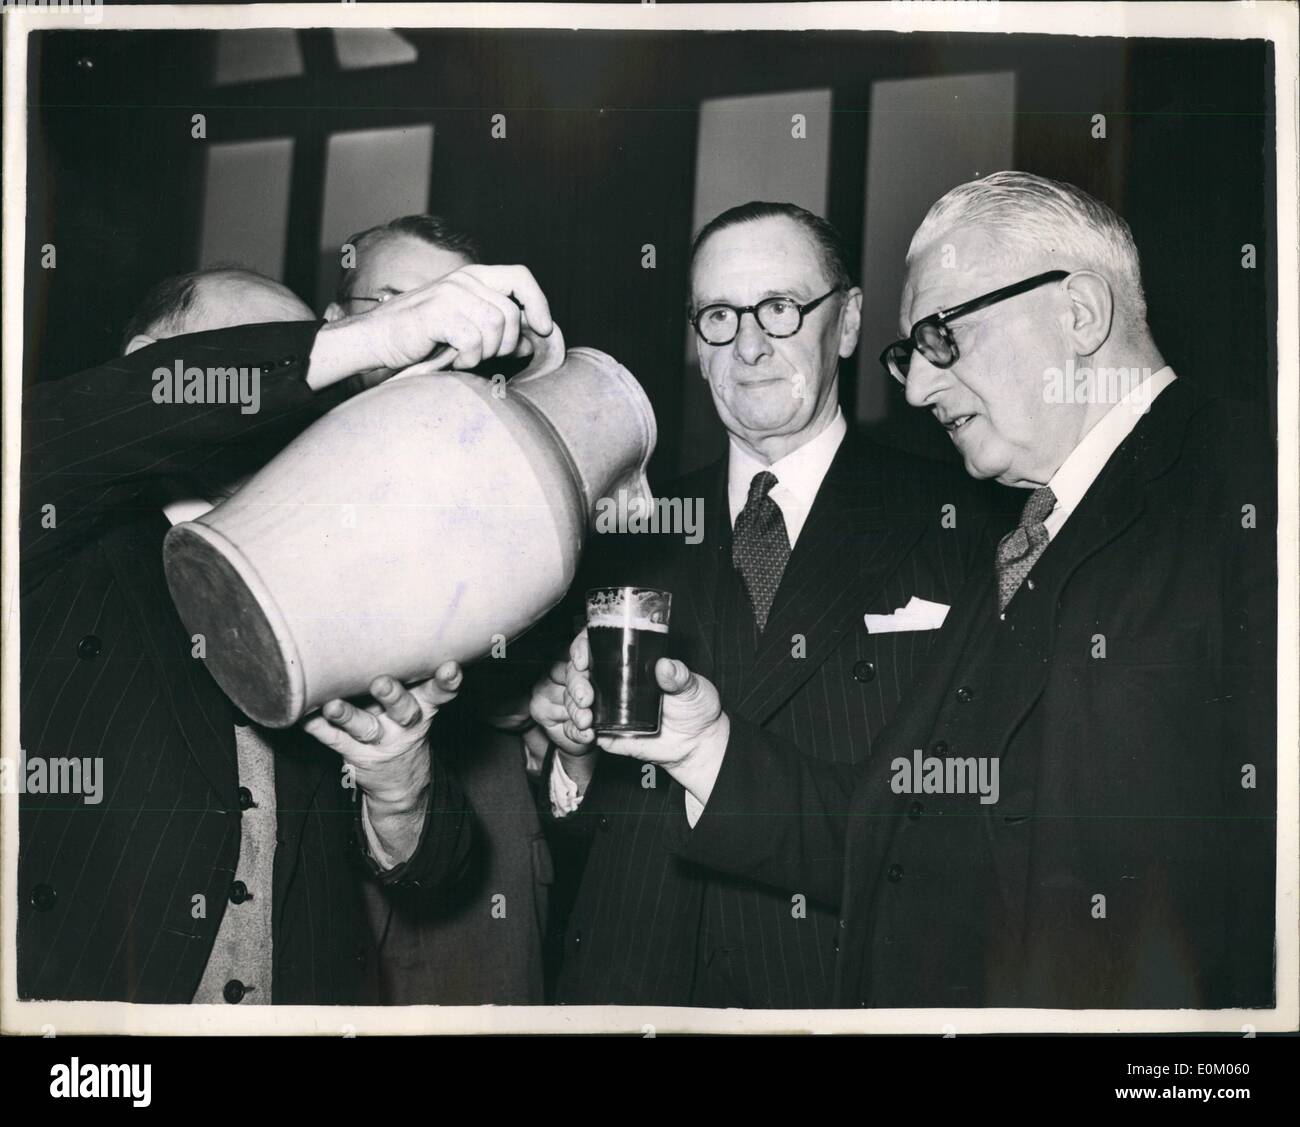 Feb. 02, 1953 - ''Cake and Ale'' ceremony at Stationer's Hall traditional distribution.: The three hundred and forty one year old ceremony of Cake and Ale Distribution at Stationer's Hall, was carried out again today - Ash Wednesday.. Hundreds of Liverymen of the Stationer's Company and the Newspaper Makers' Company filed into the hall to receive the traditional ale and cake. Photo shows Mr. J.E. nevill and Hall Keeper distributes ale to Mr. T.C. Danks a Liveryman watched by (Centre) Major T.E. Adiard who is also a Liveryman - during the ceremony today. Stock Photo